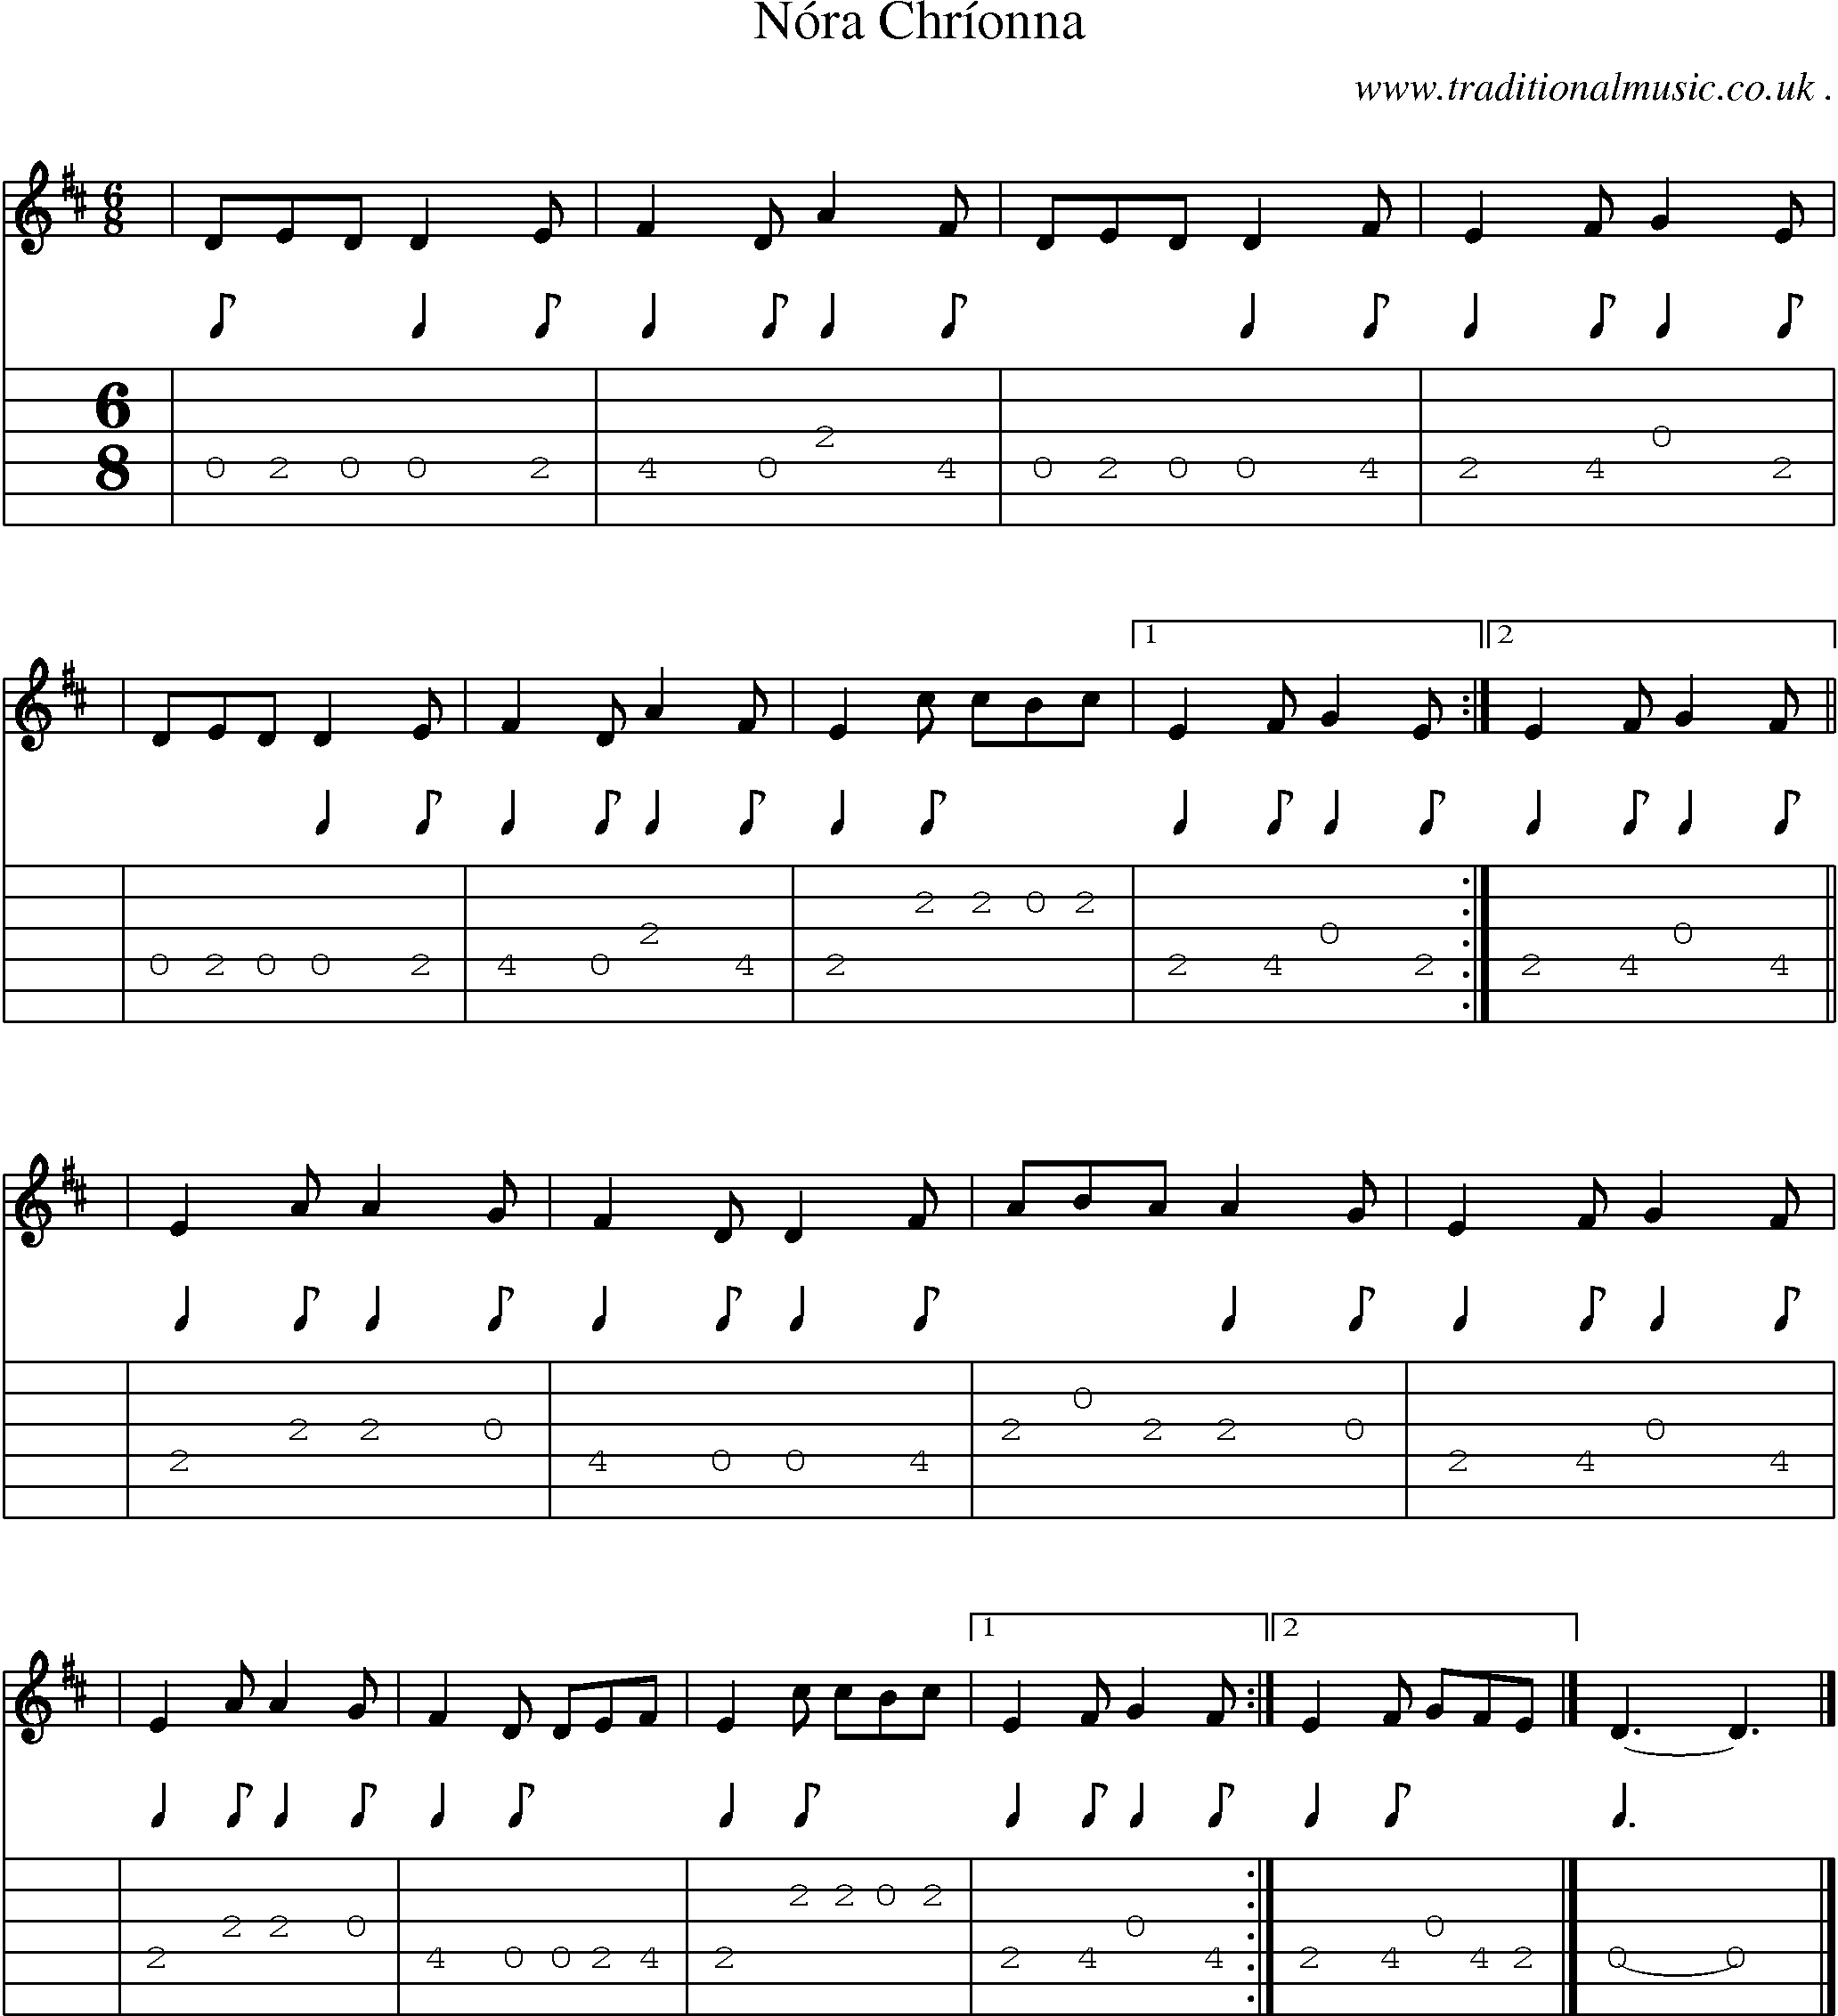 Sheet-music  score, Chords and Guitar Tabs for Nora Chrionna